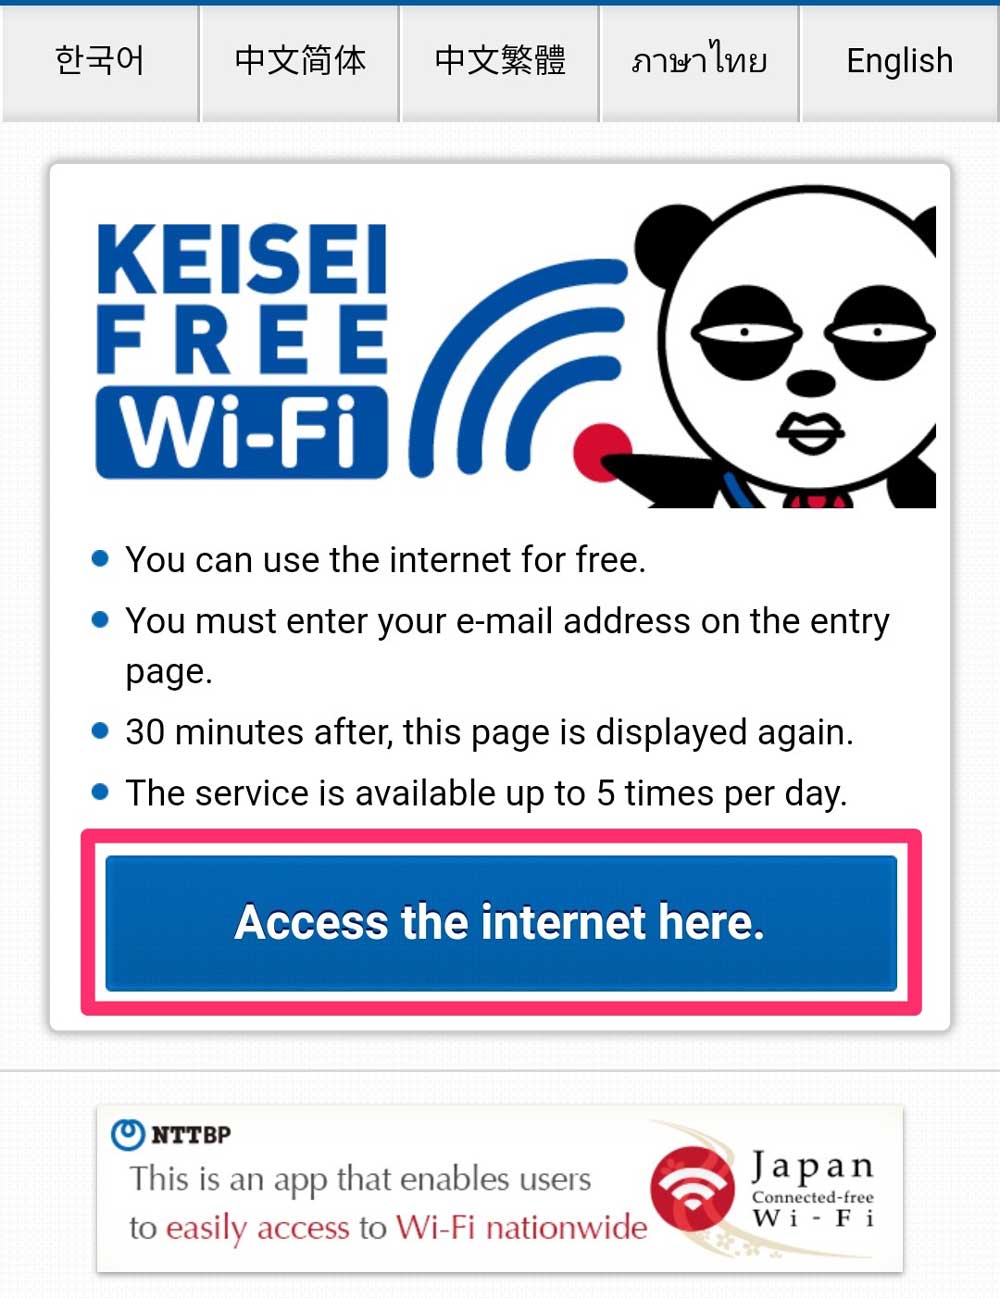 「Access the internet here」を選ぶ